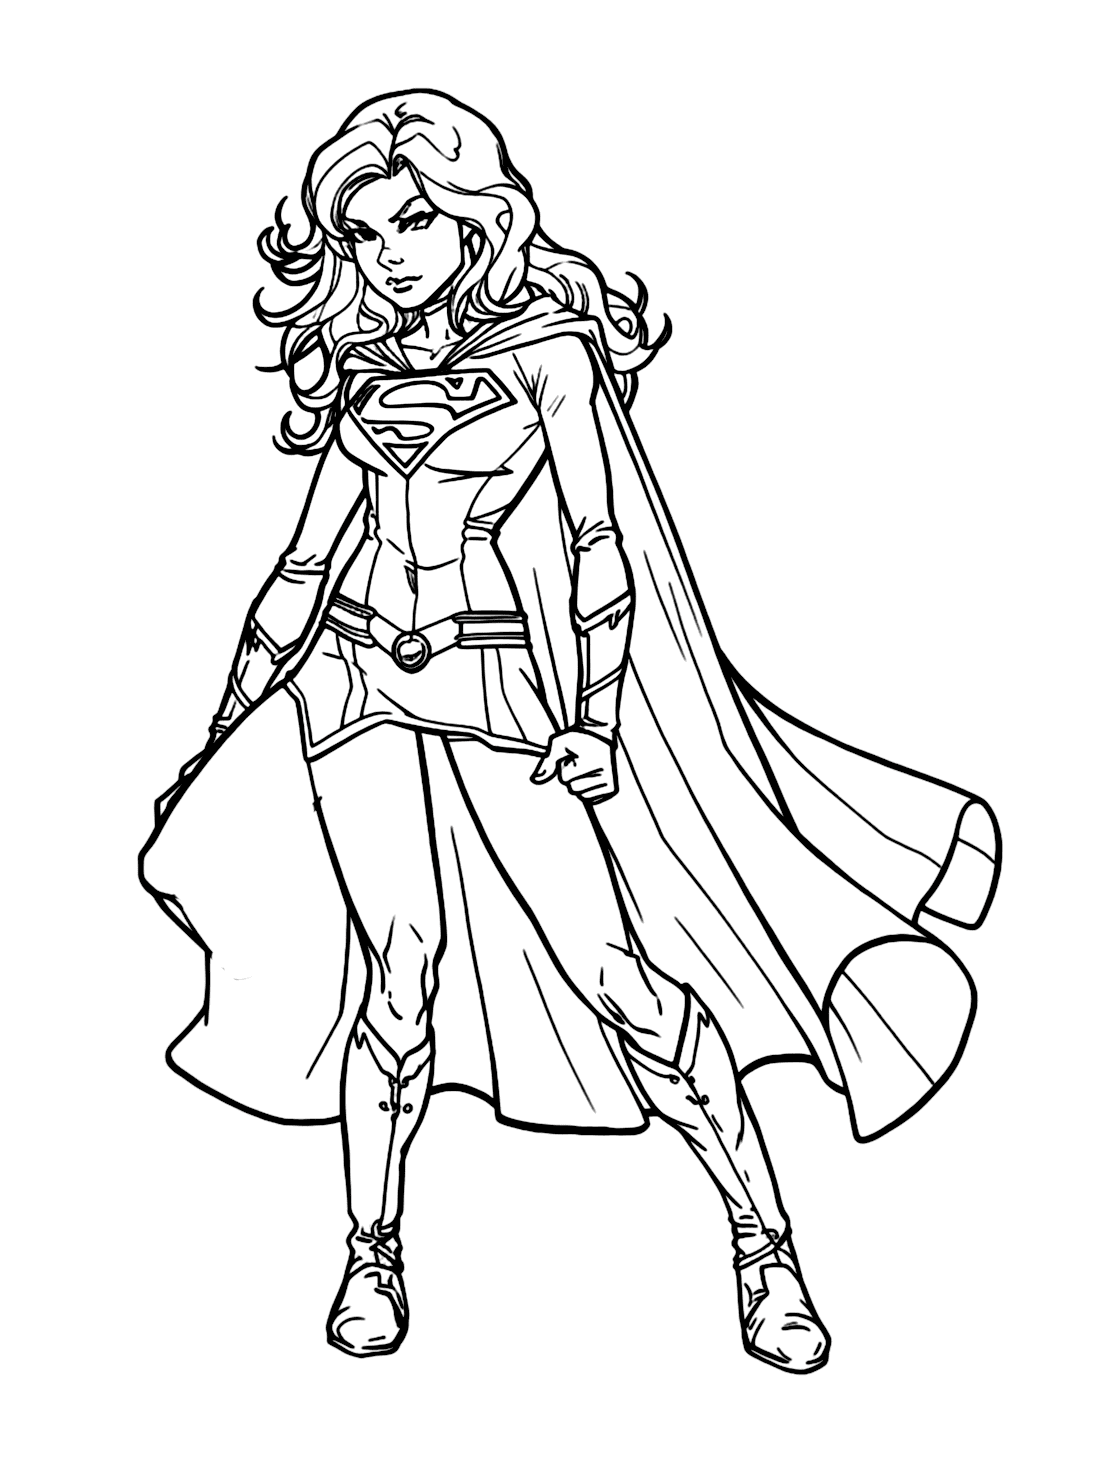 Supergirl Coloring Pages Online For Kids!